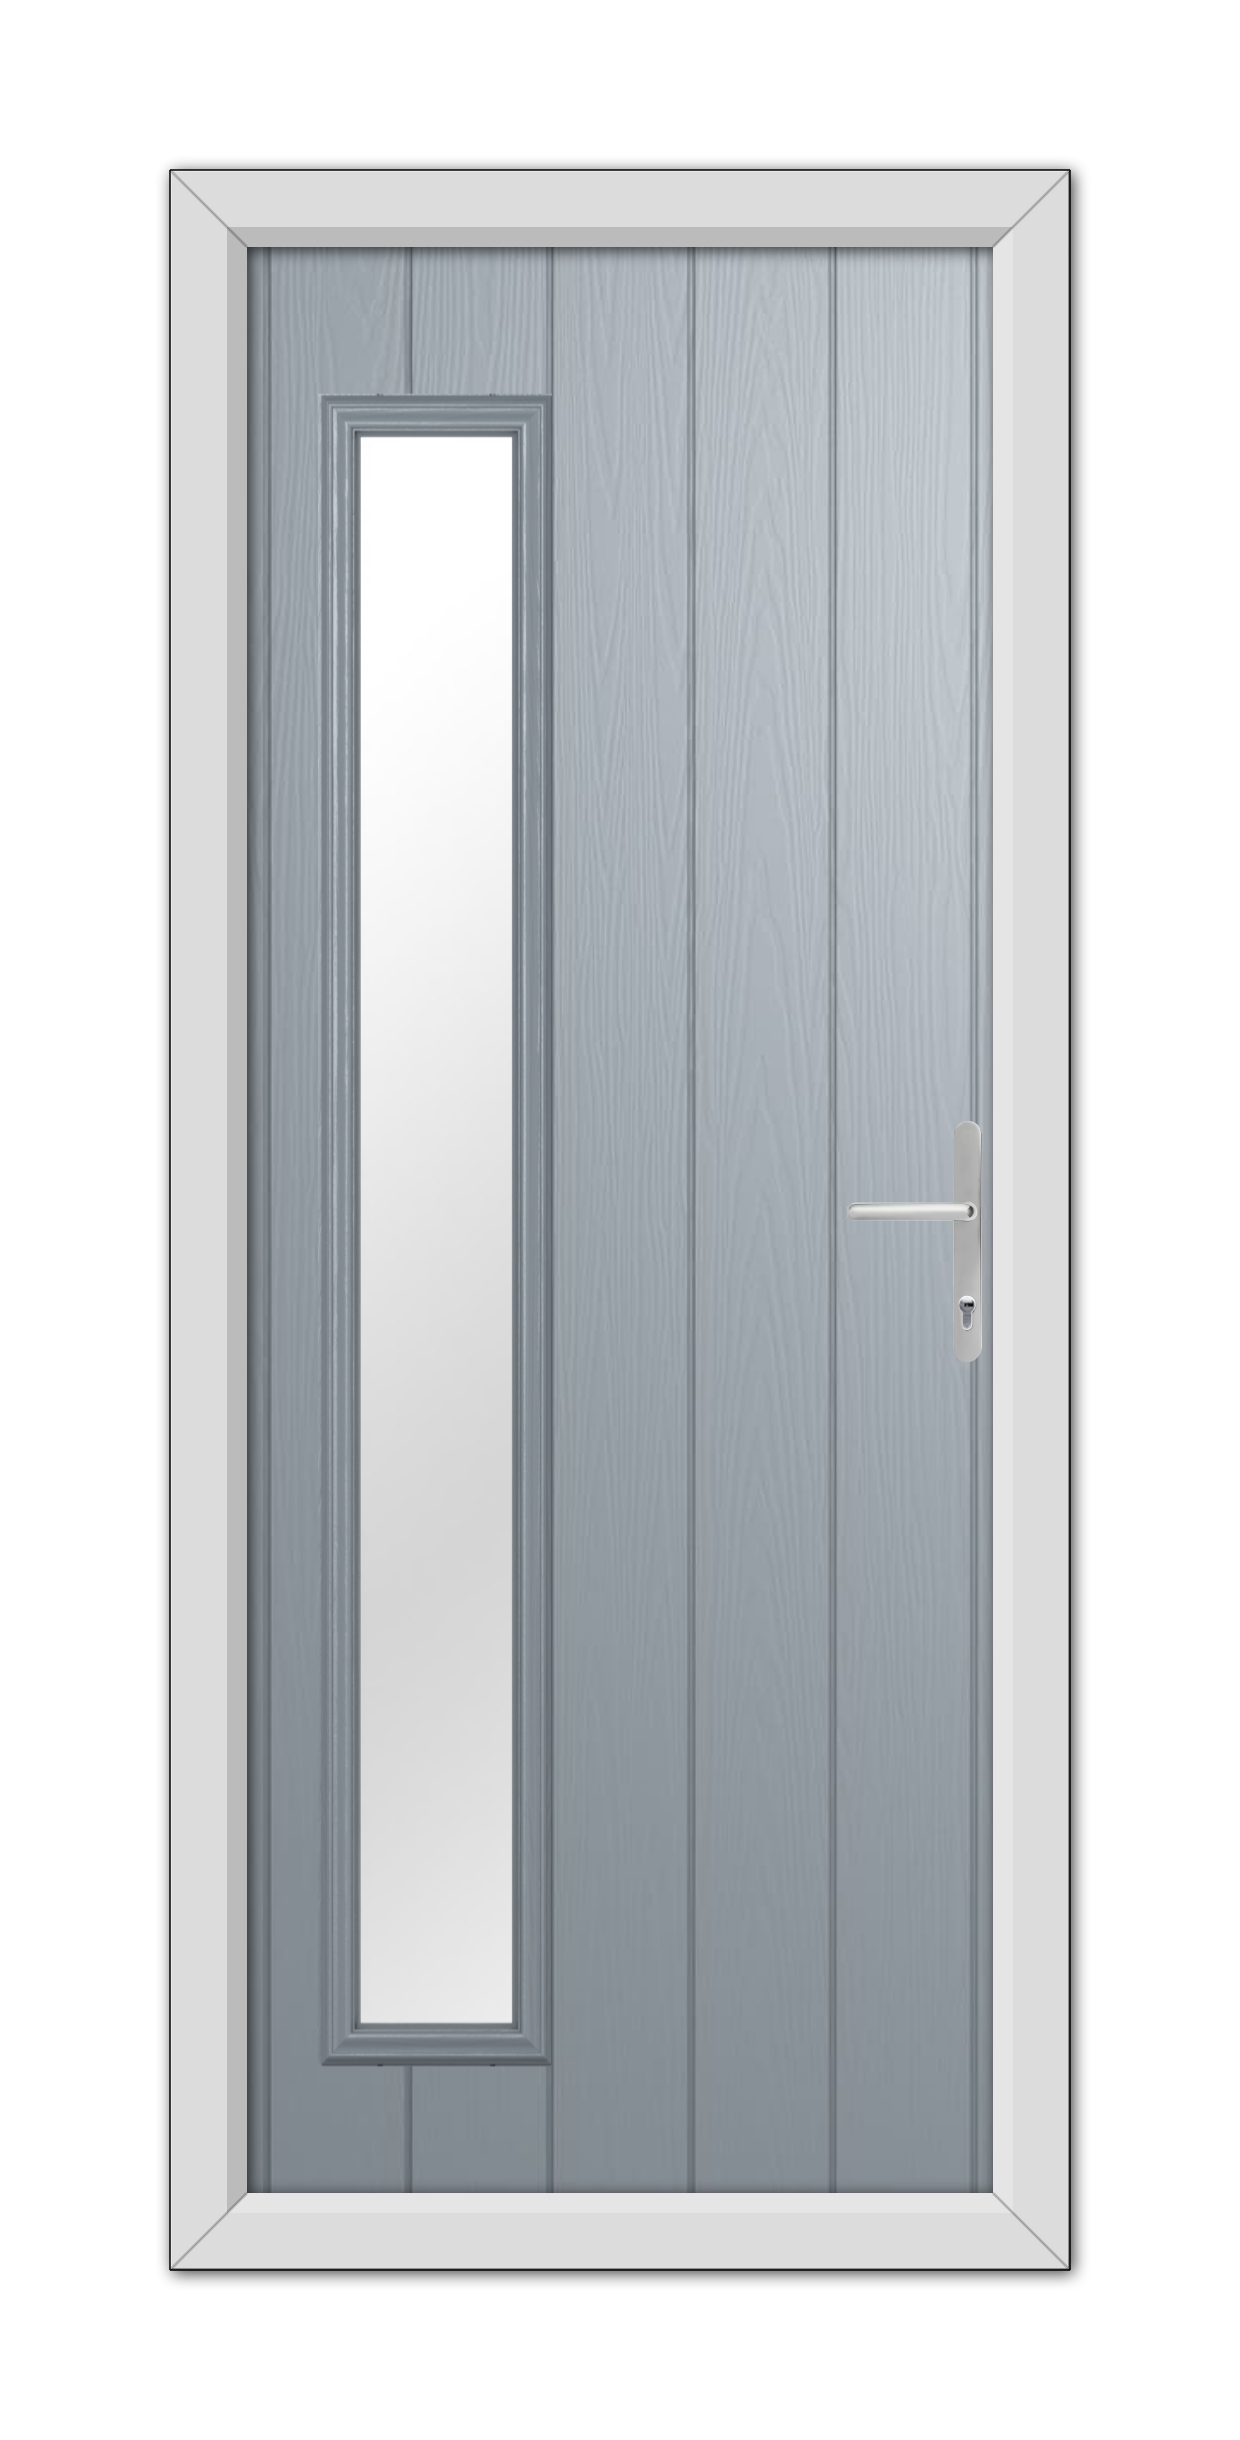 A French Grey Sutherland Composite Door with a vertical glass panel on the left side, featuring a metallic handle, set within a white frame.